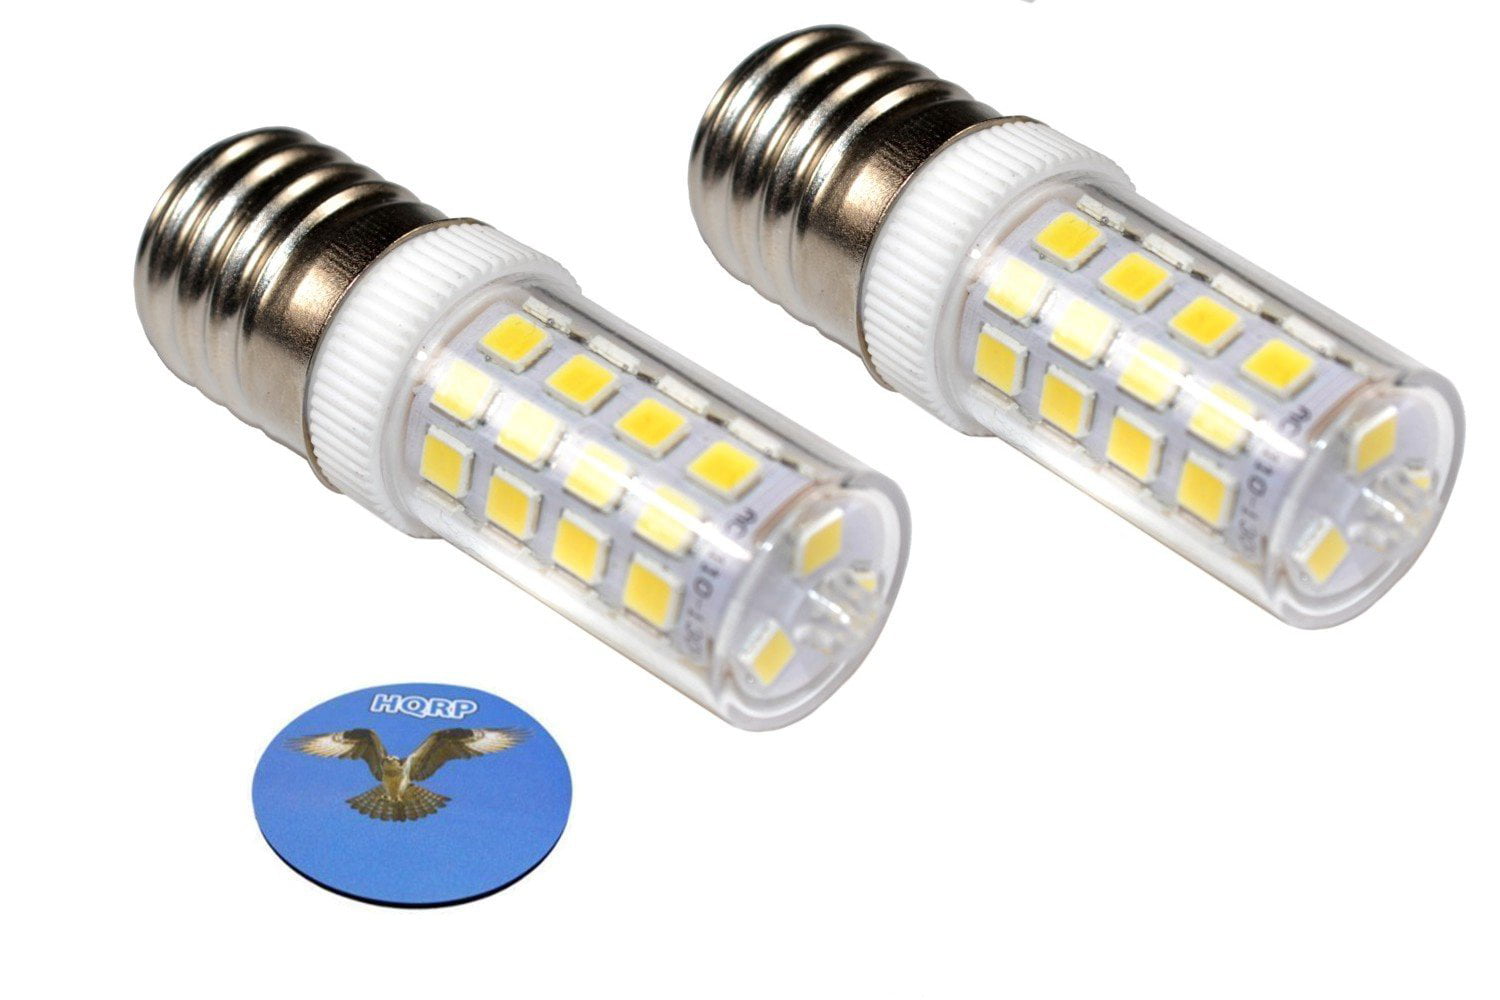 REPLACEMENT BULB FOR GOOD EARTH LIGHTING OK-FT 232/98 55W 